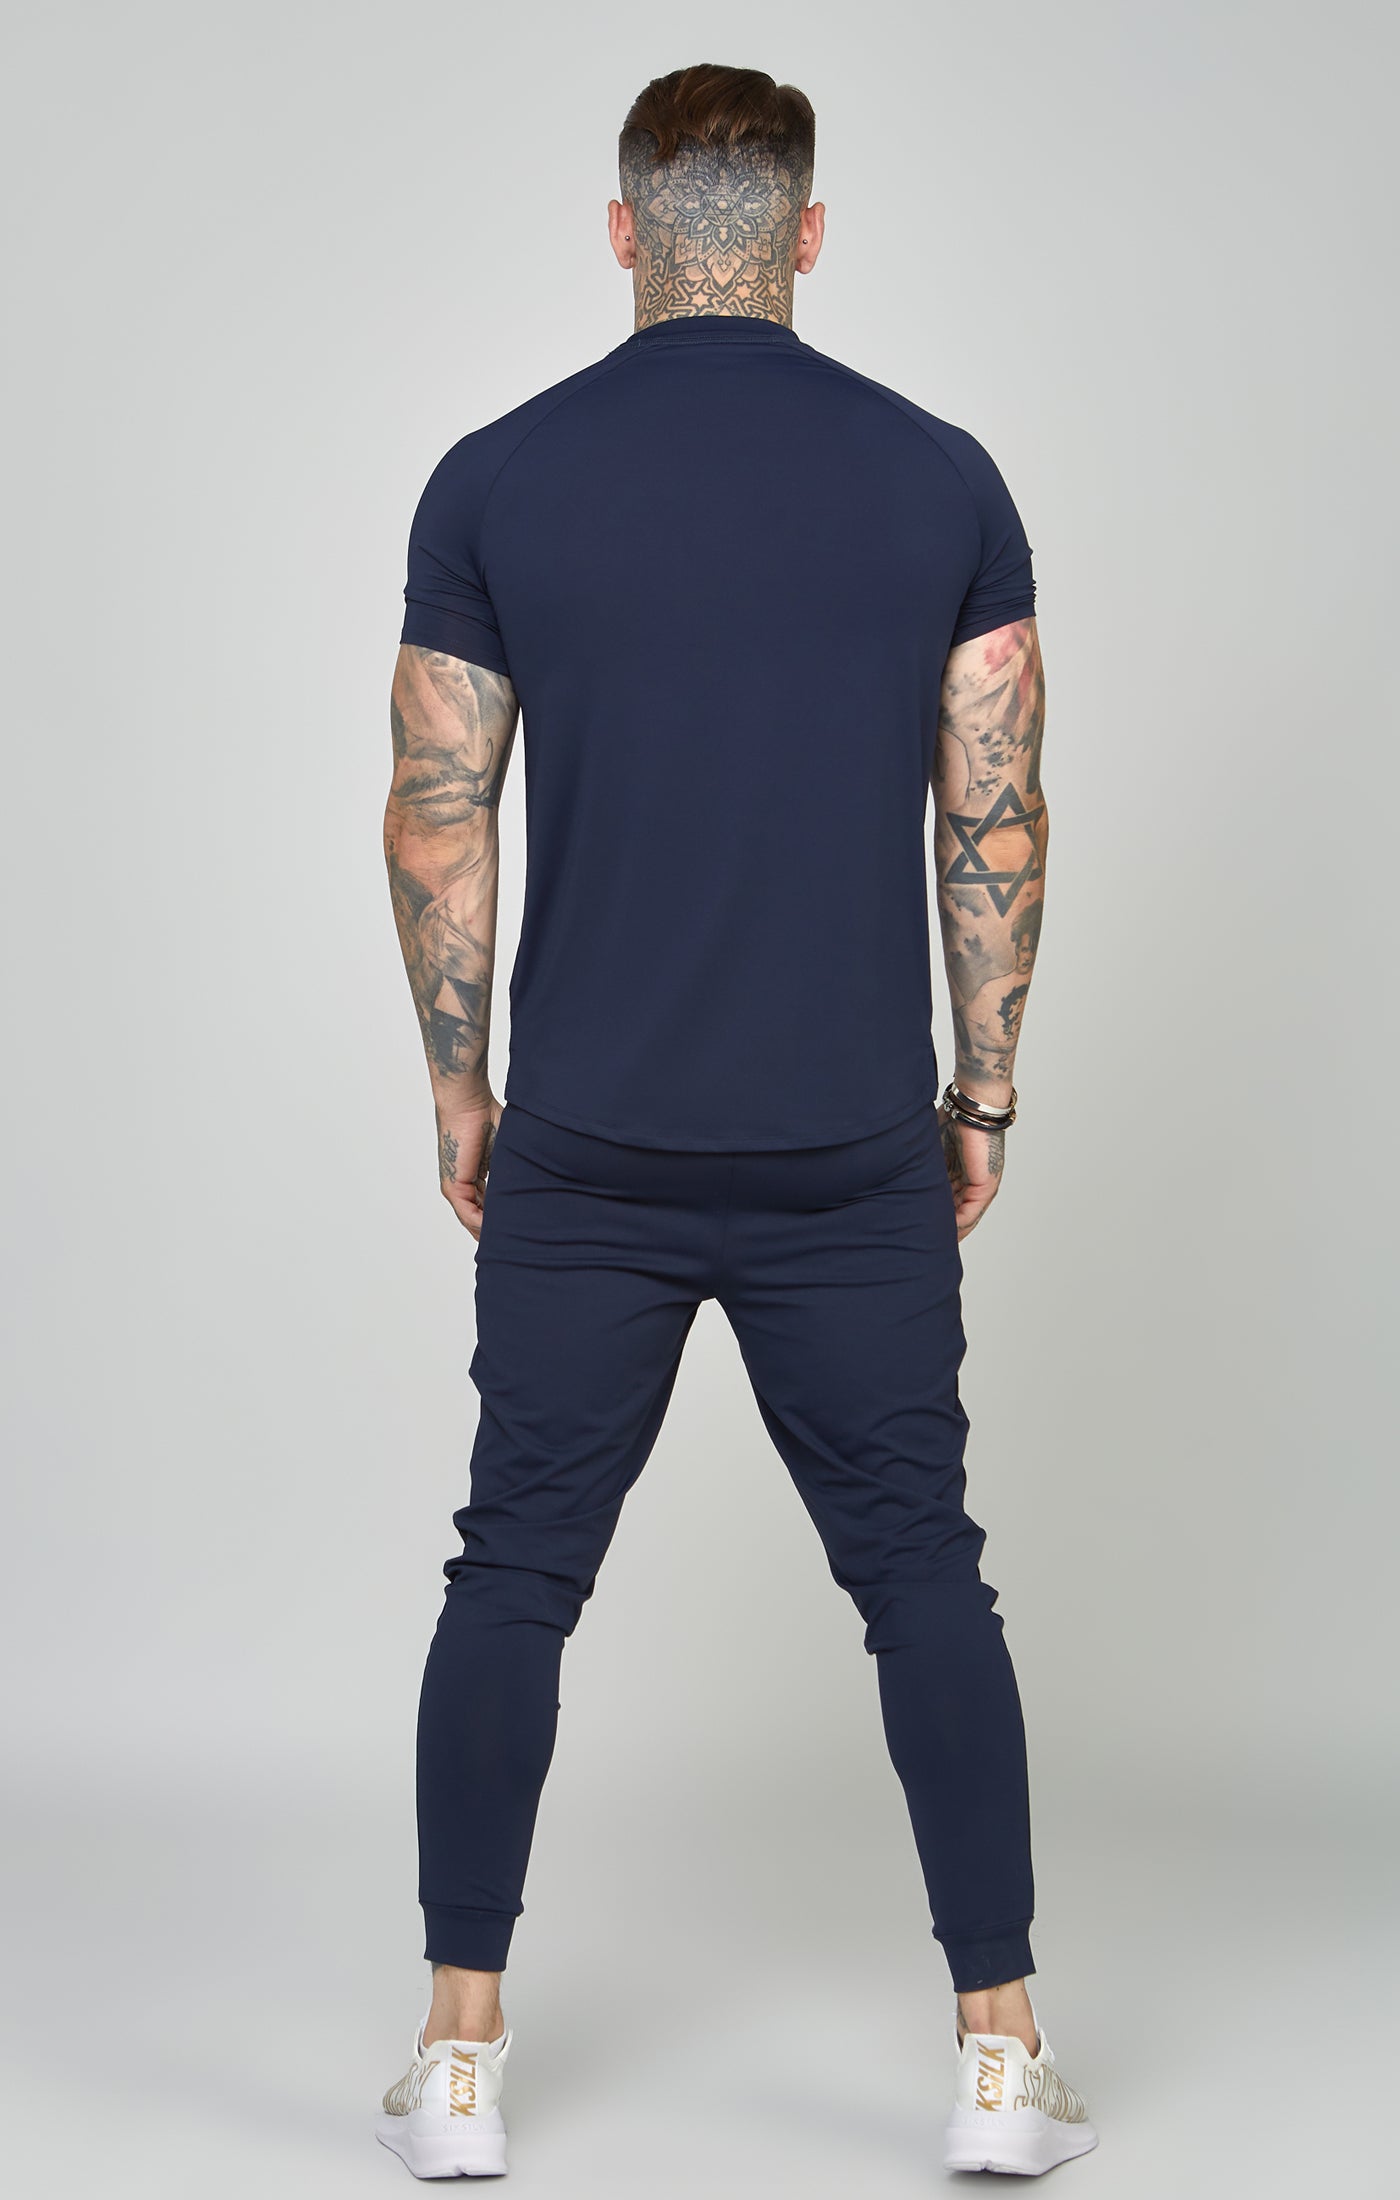 Load image into Gallery viewer, Navy Sports Curved Hem Muscle Fit T-Shirt (4)